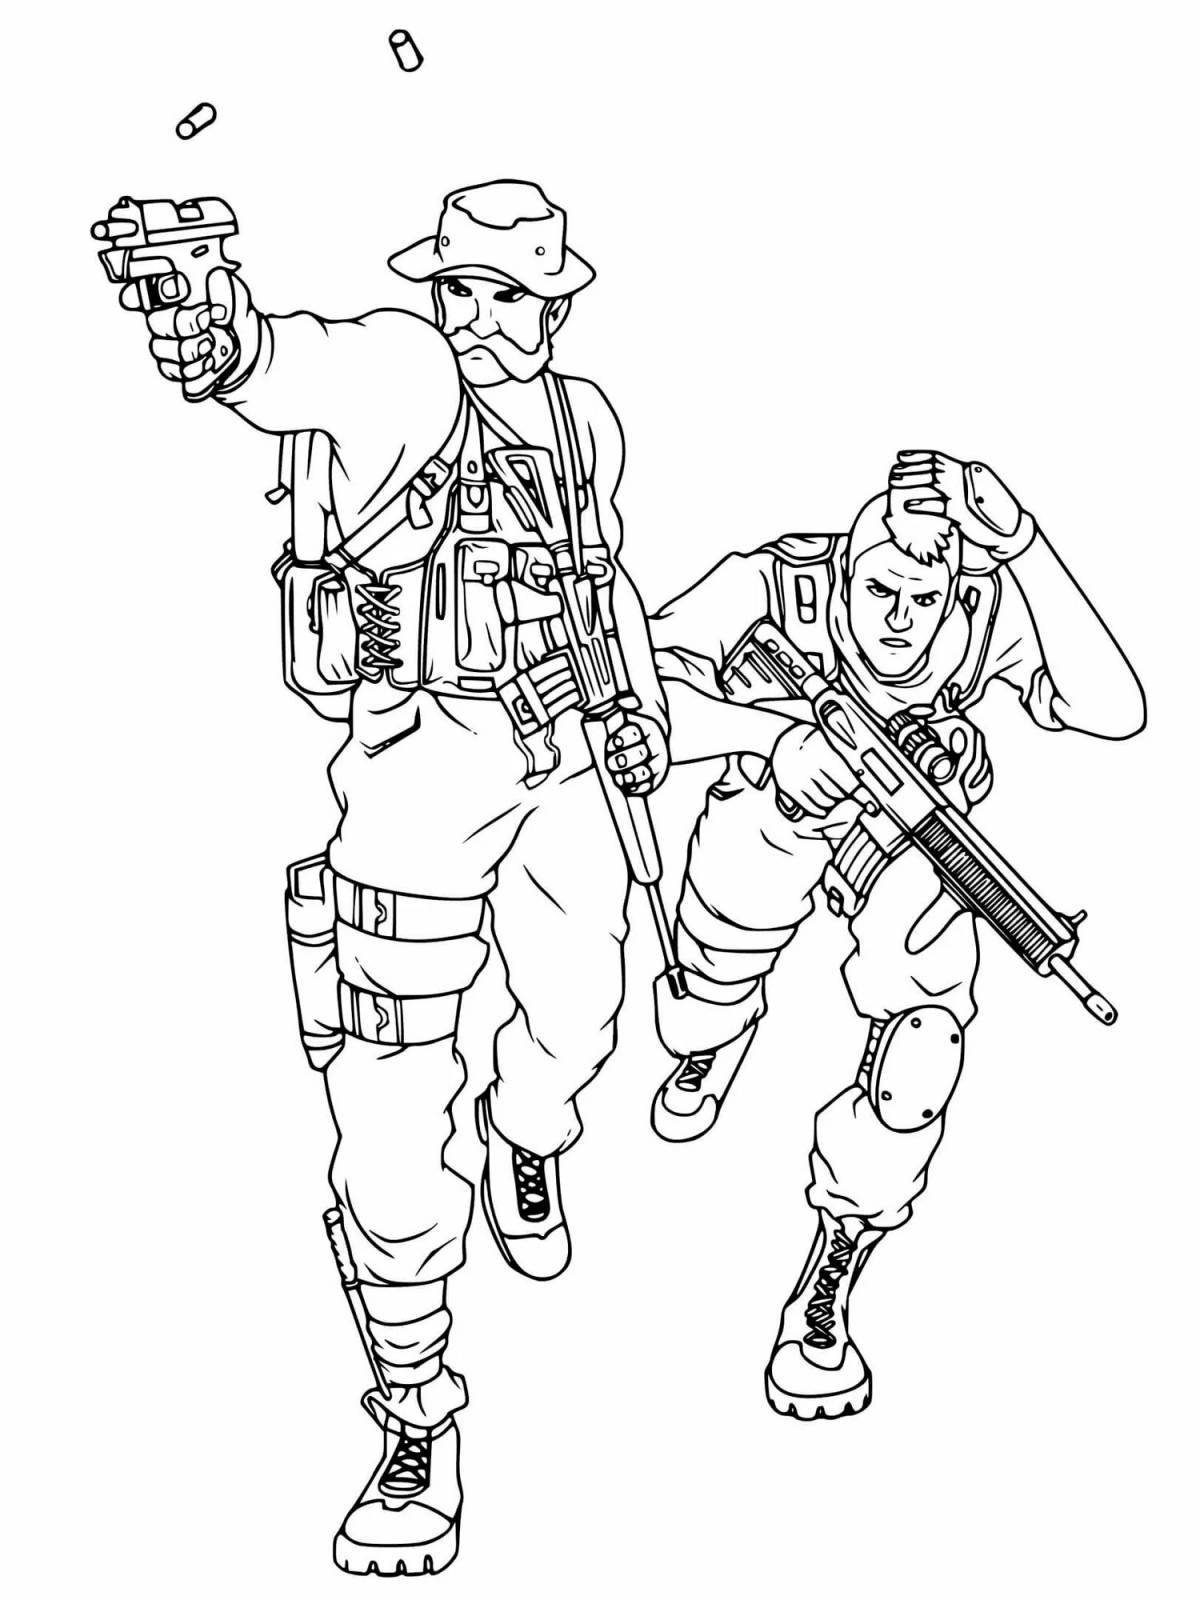 Colorful feces duty coloring page